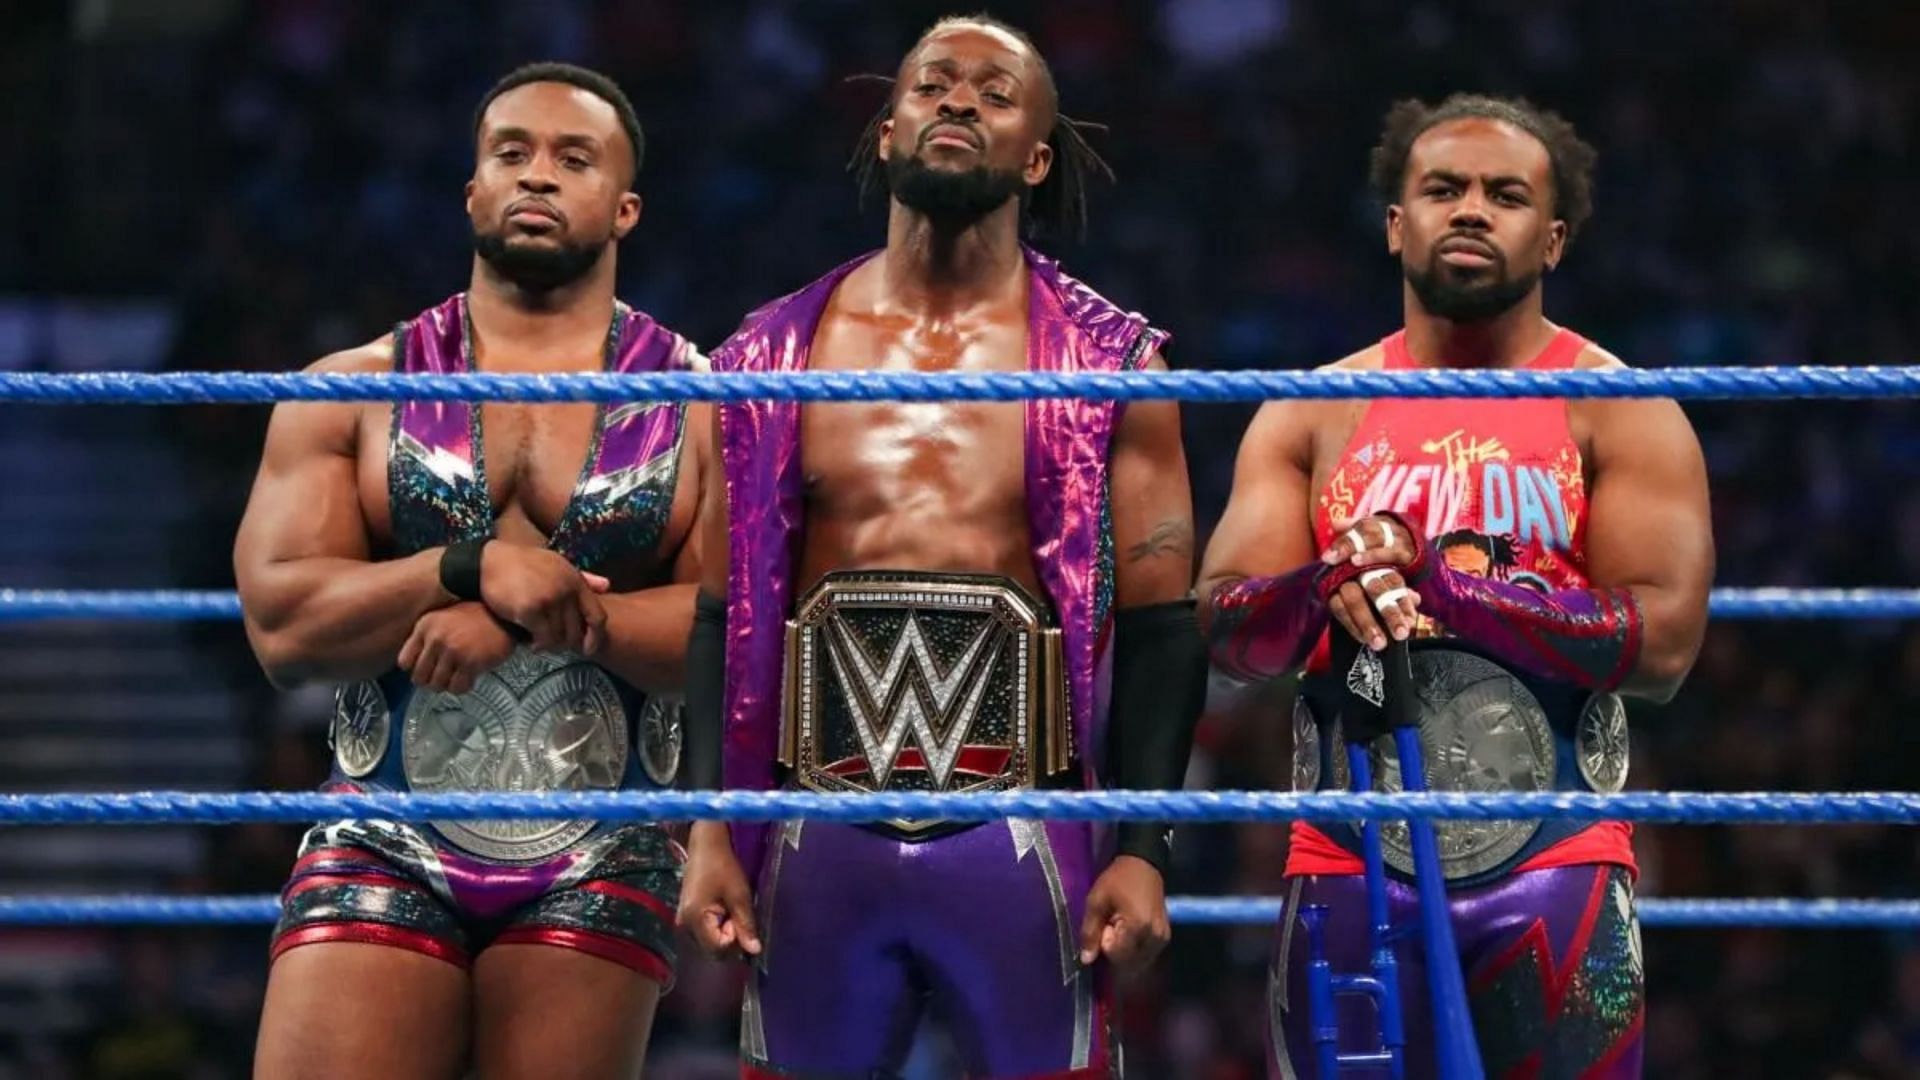 The New Day is currently on the WWE RAW roster